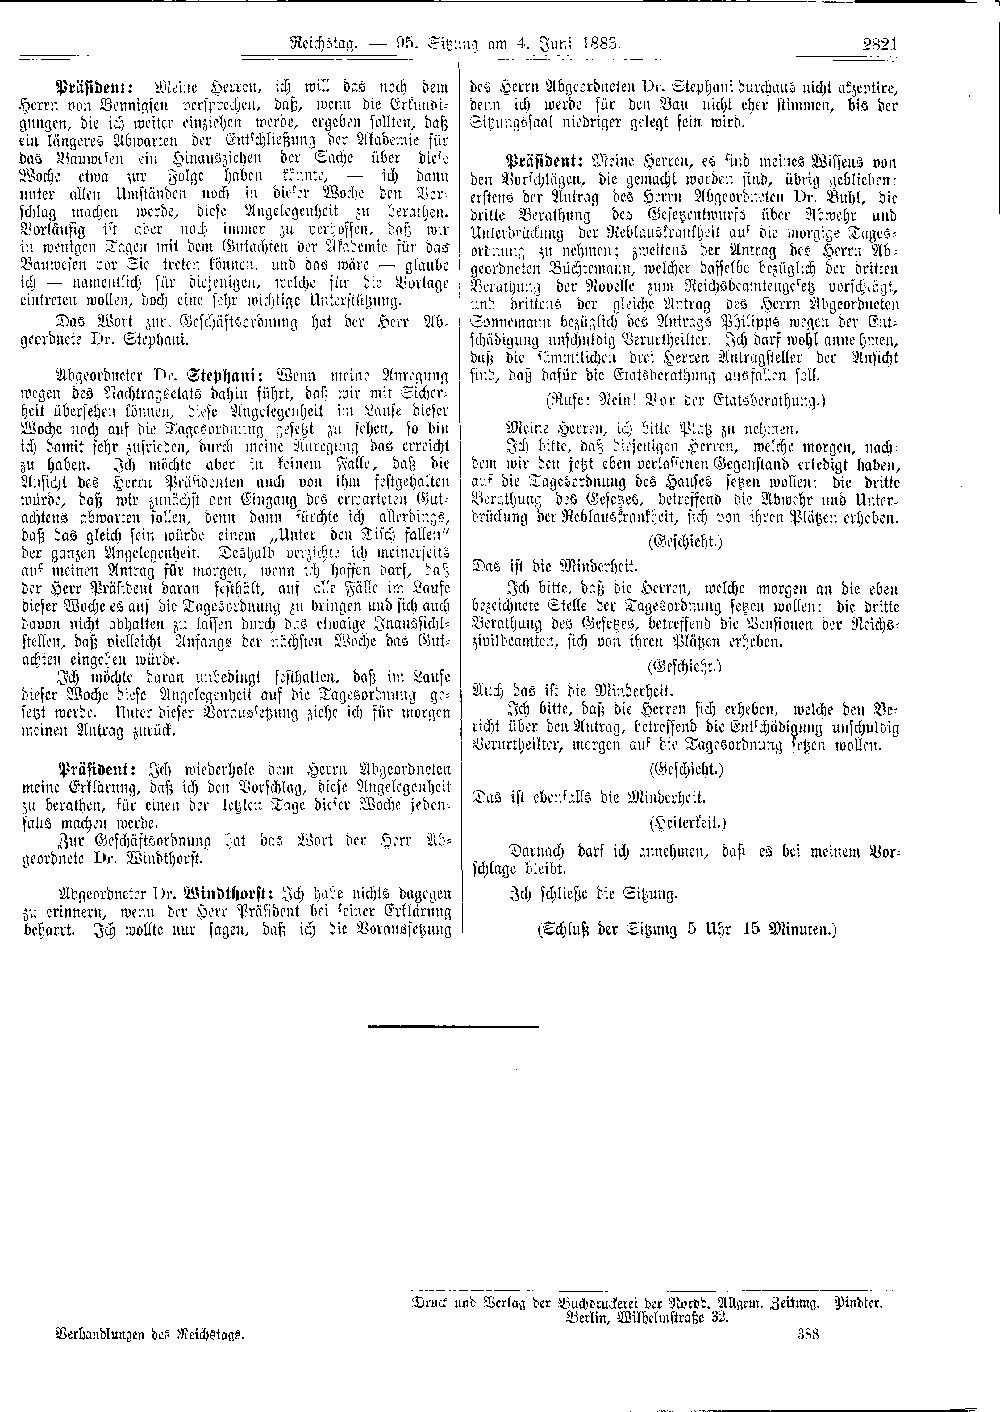 Scan of page 2821